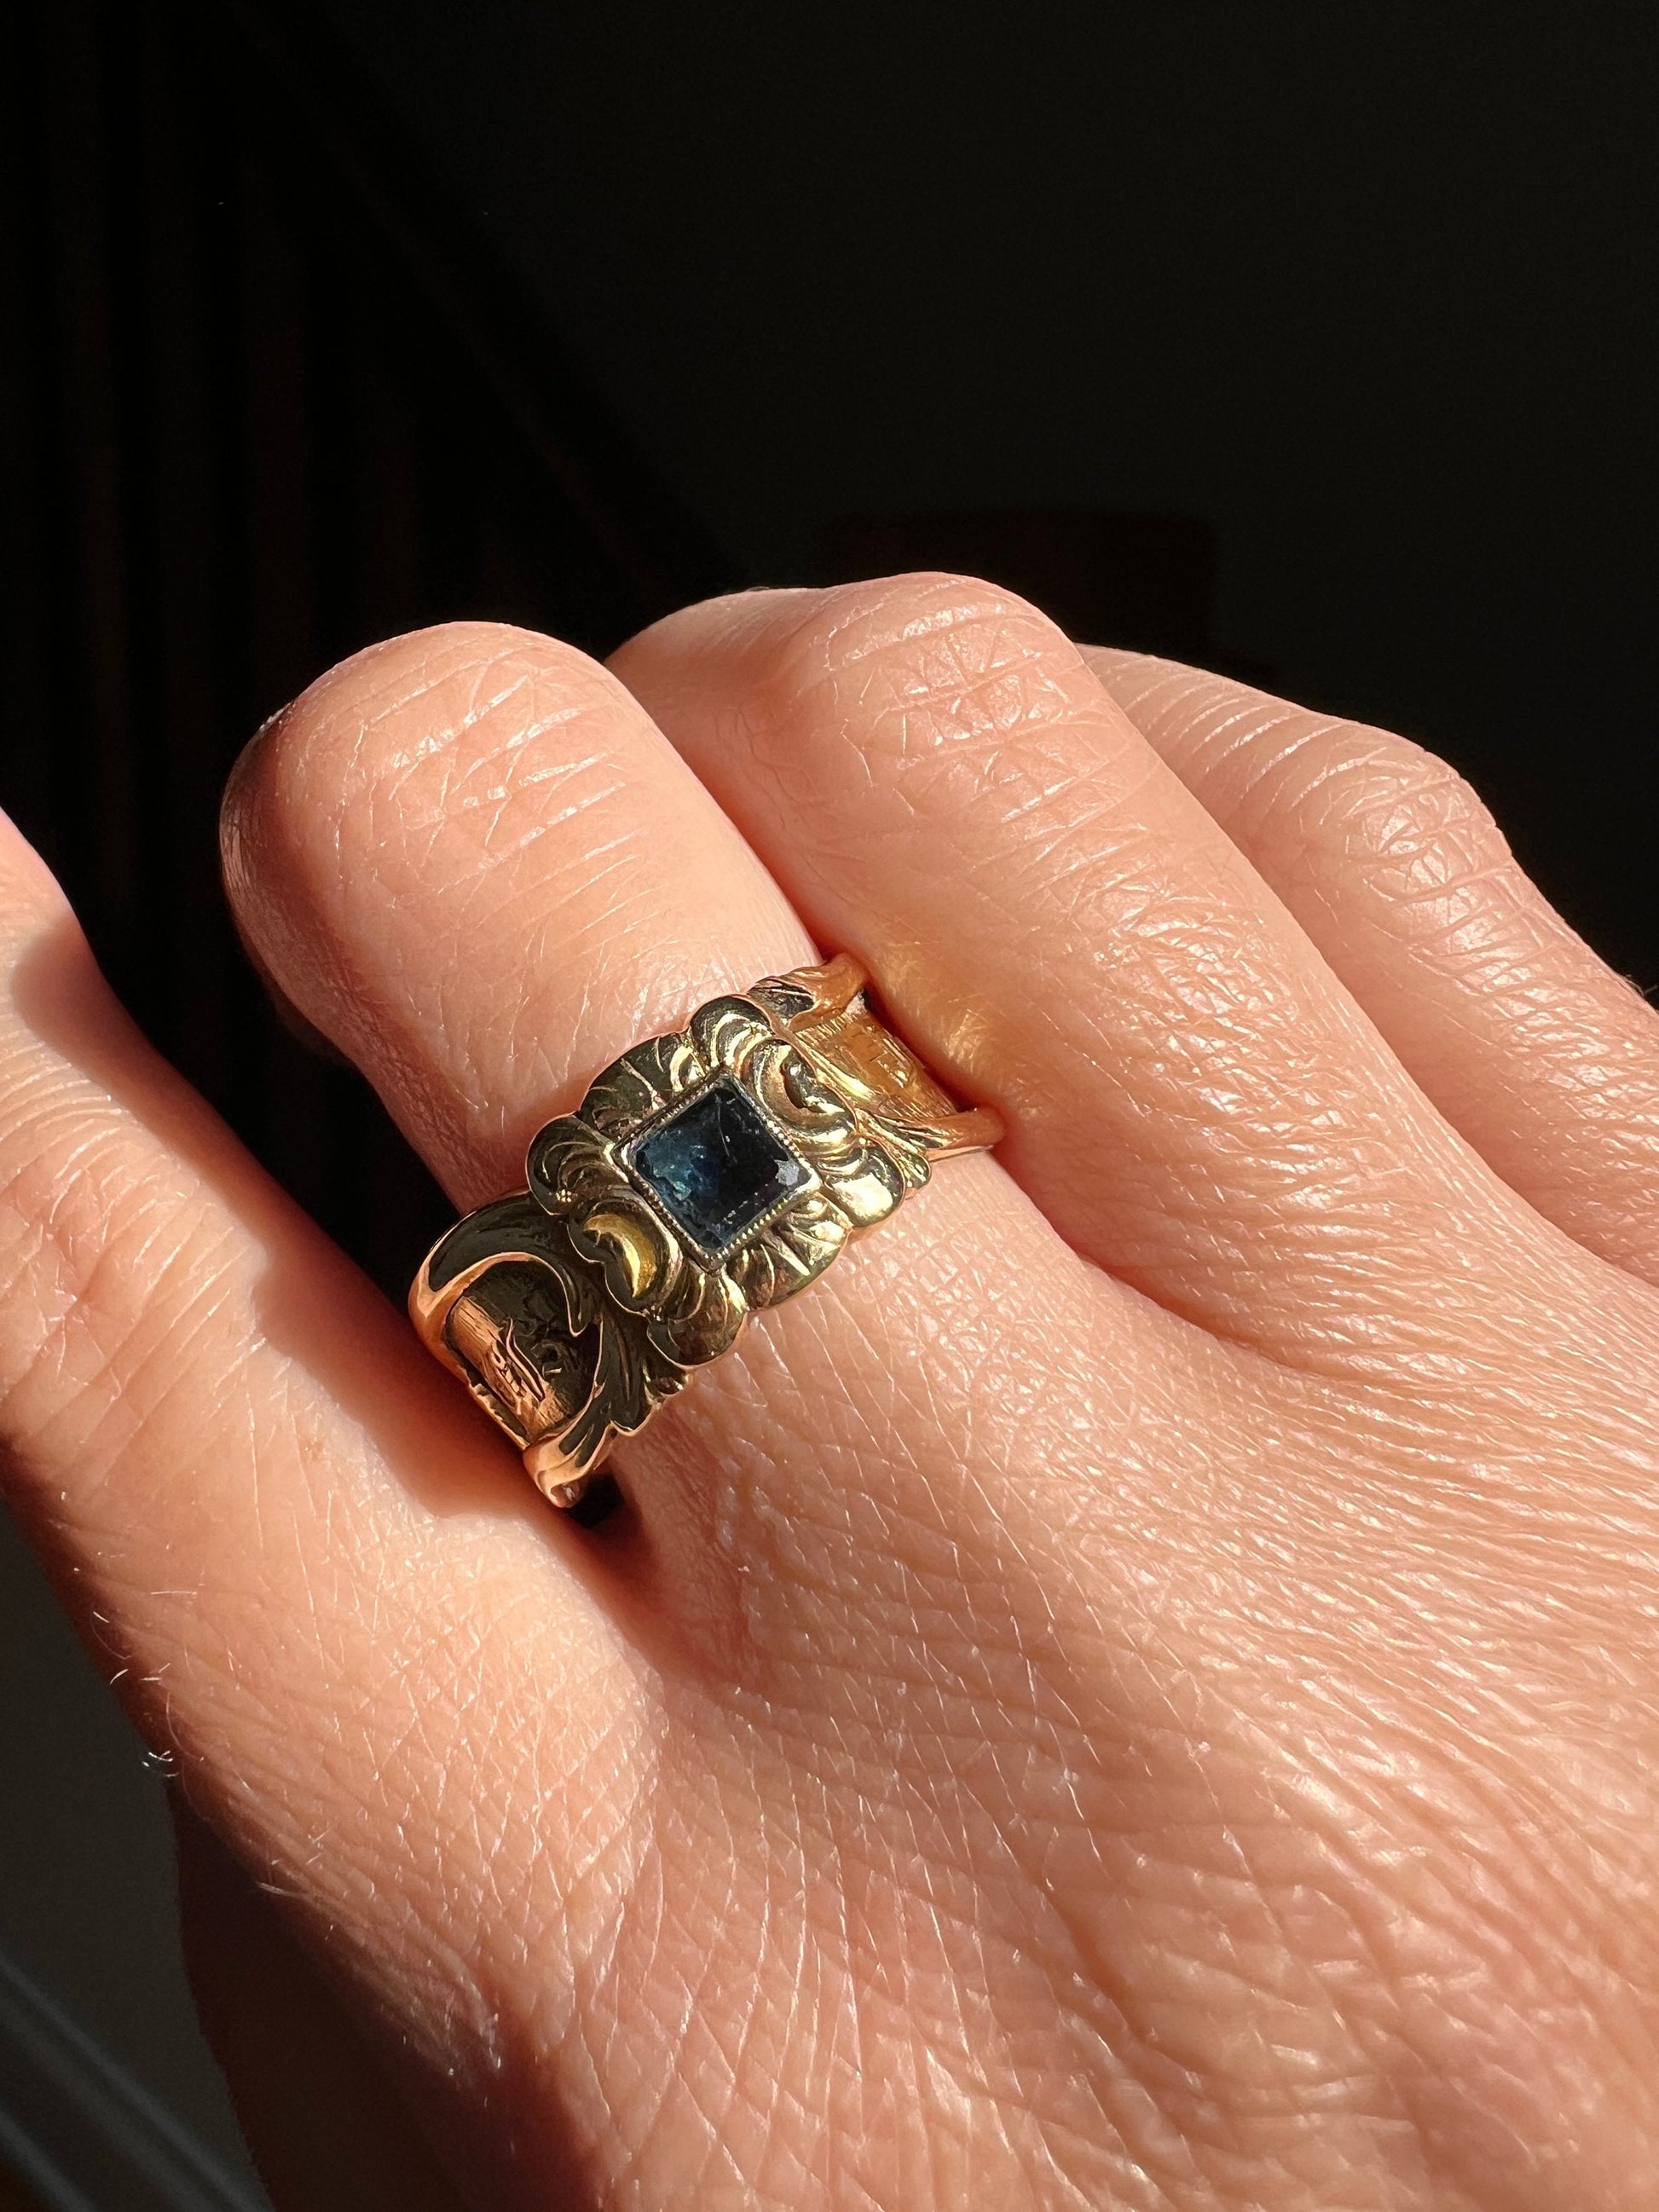 Heavy DATED 1840 Square Cut SAPPHIRE Swirling Wide Band Ring 18k Gold In Memory Of Mourning Ring Unique Early Victorian Chunky Cigar Pipe